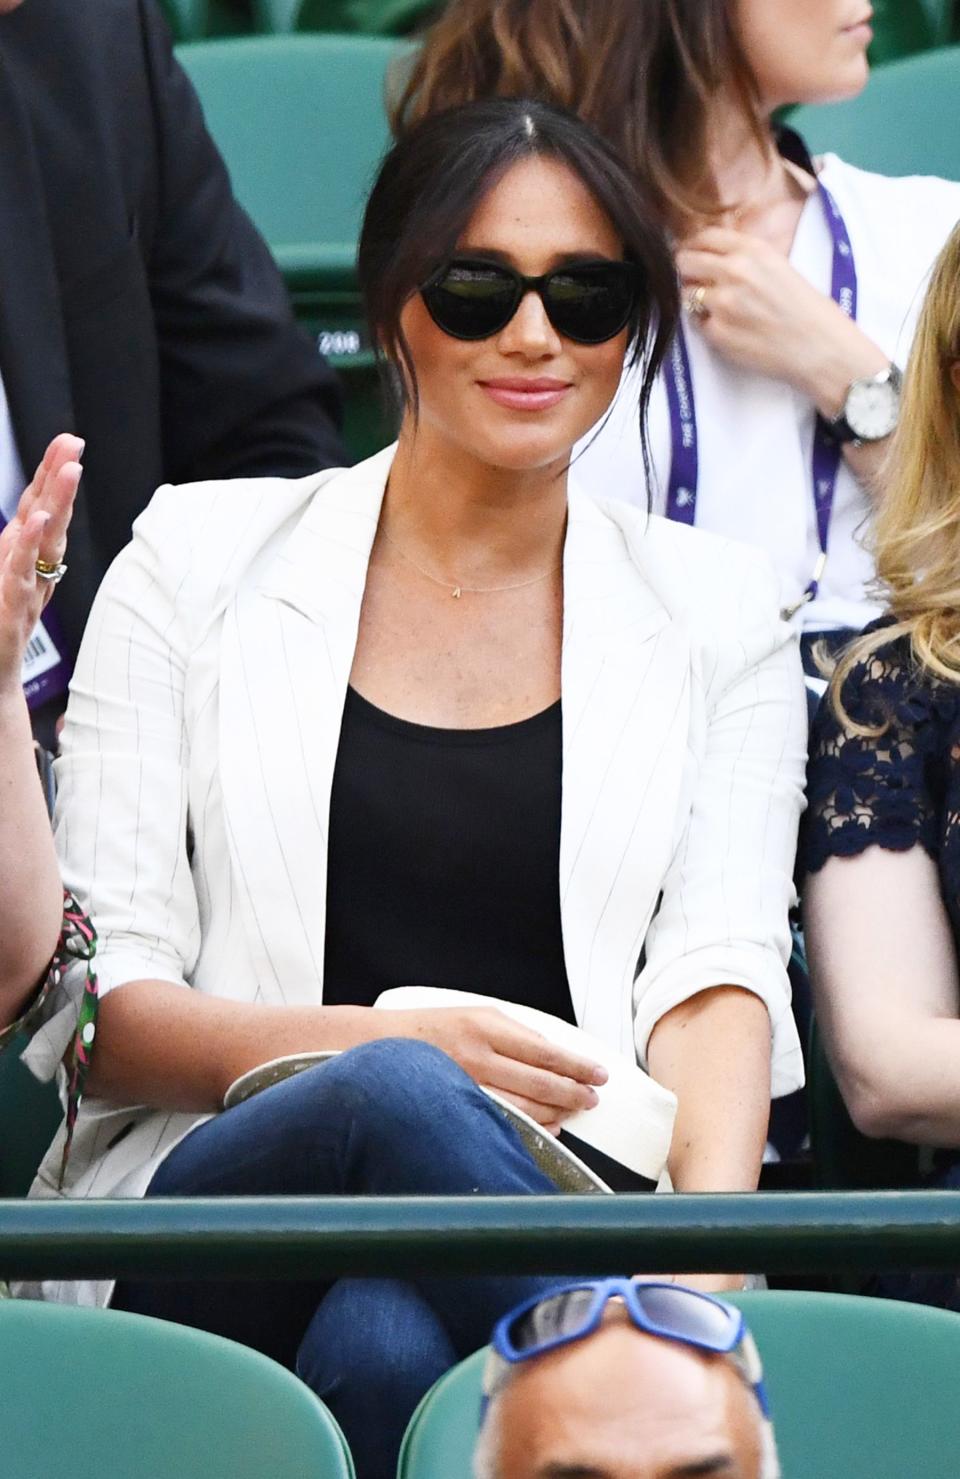 How Meghan Markle’s Chic Sunglasses Brand Have Become a Royal Favorite (Even Pippa Is a Fan!)